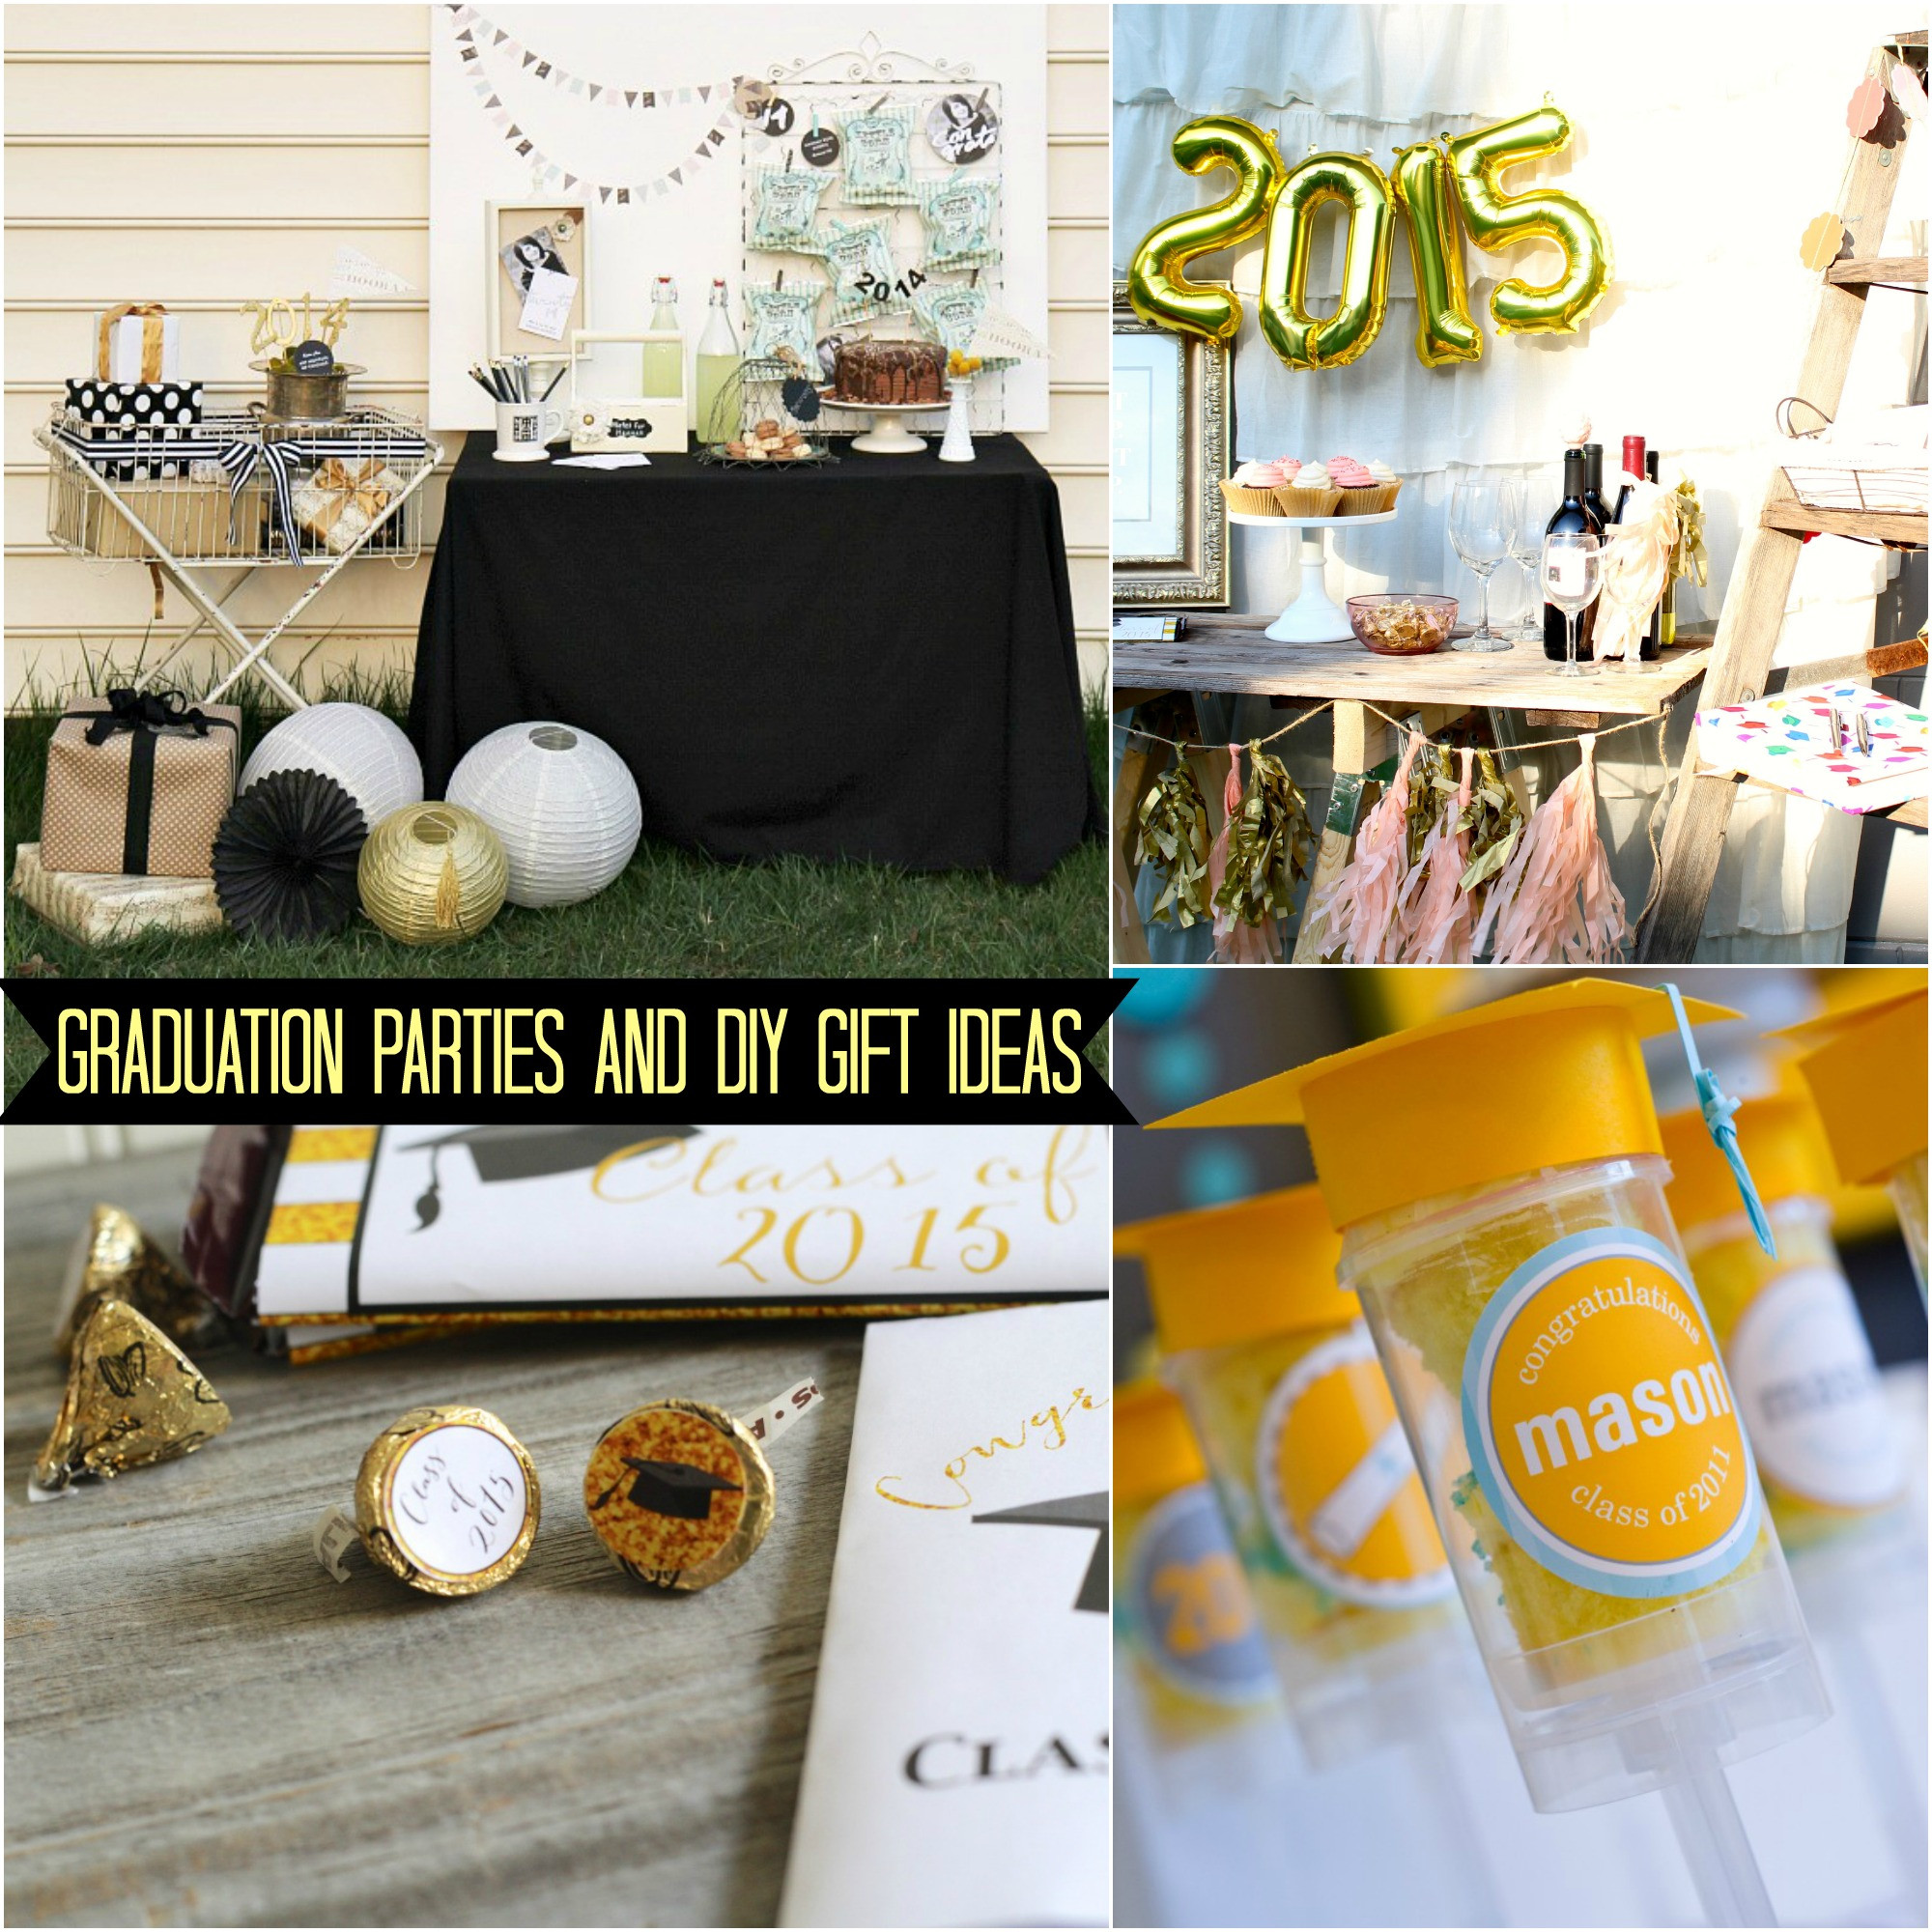 Graduation Party Ideas For Girls
 Graduation Party & Gift Ideas for Guys & Girls Some